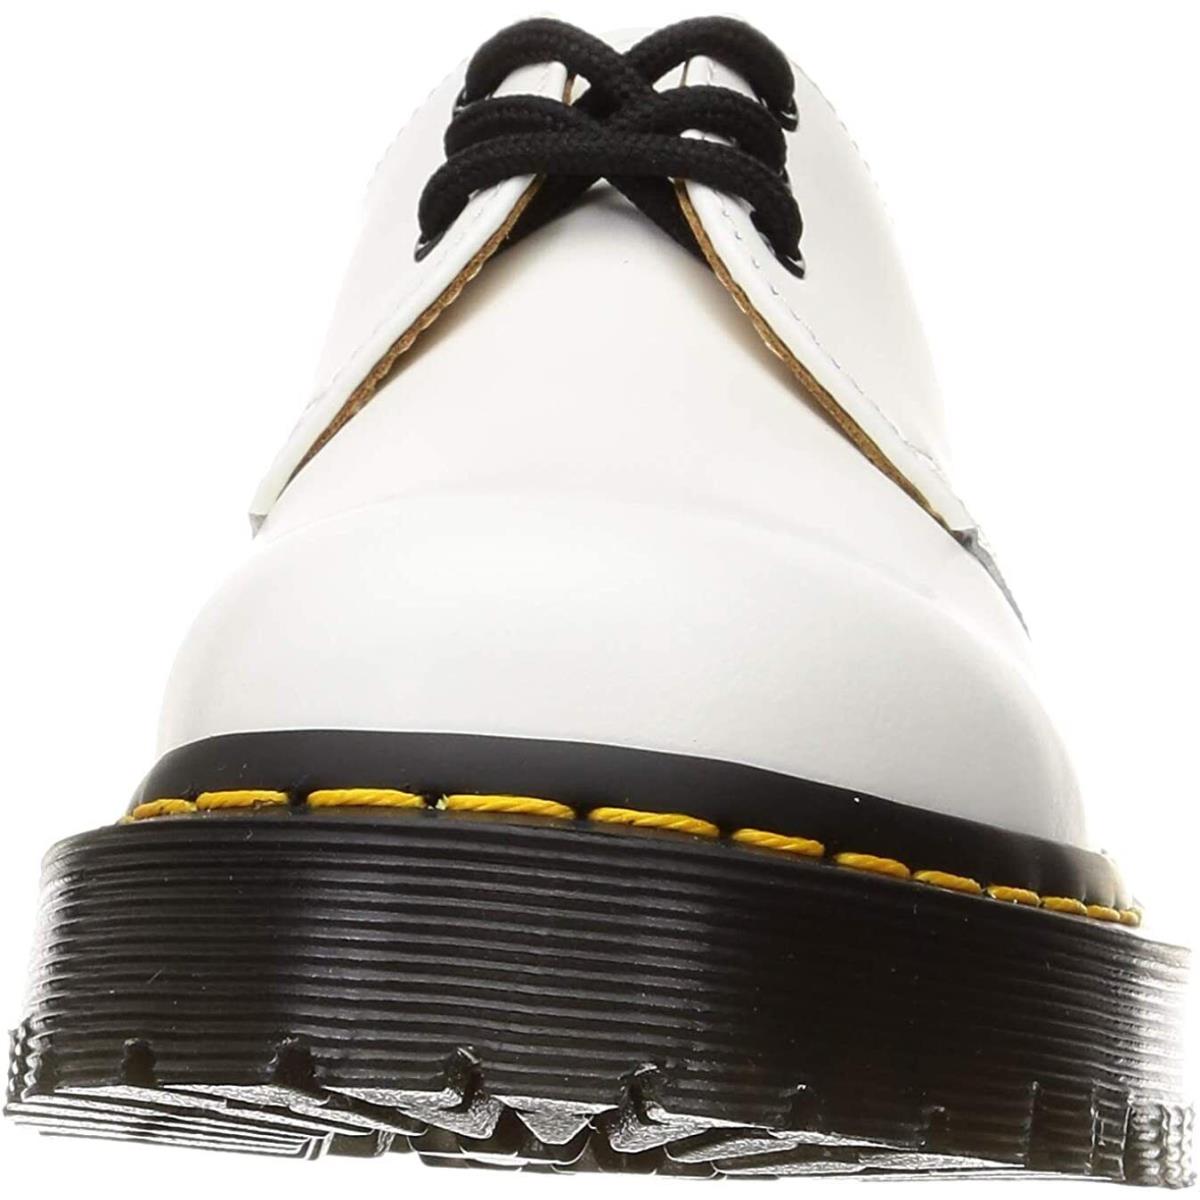 Dr. Martens 1461 Bex Shoes White Smooth